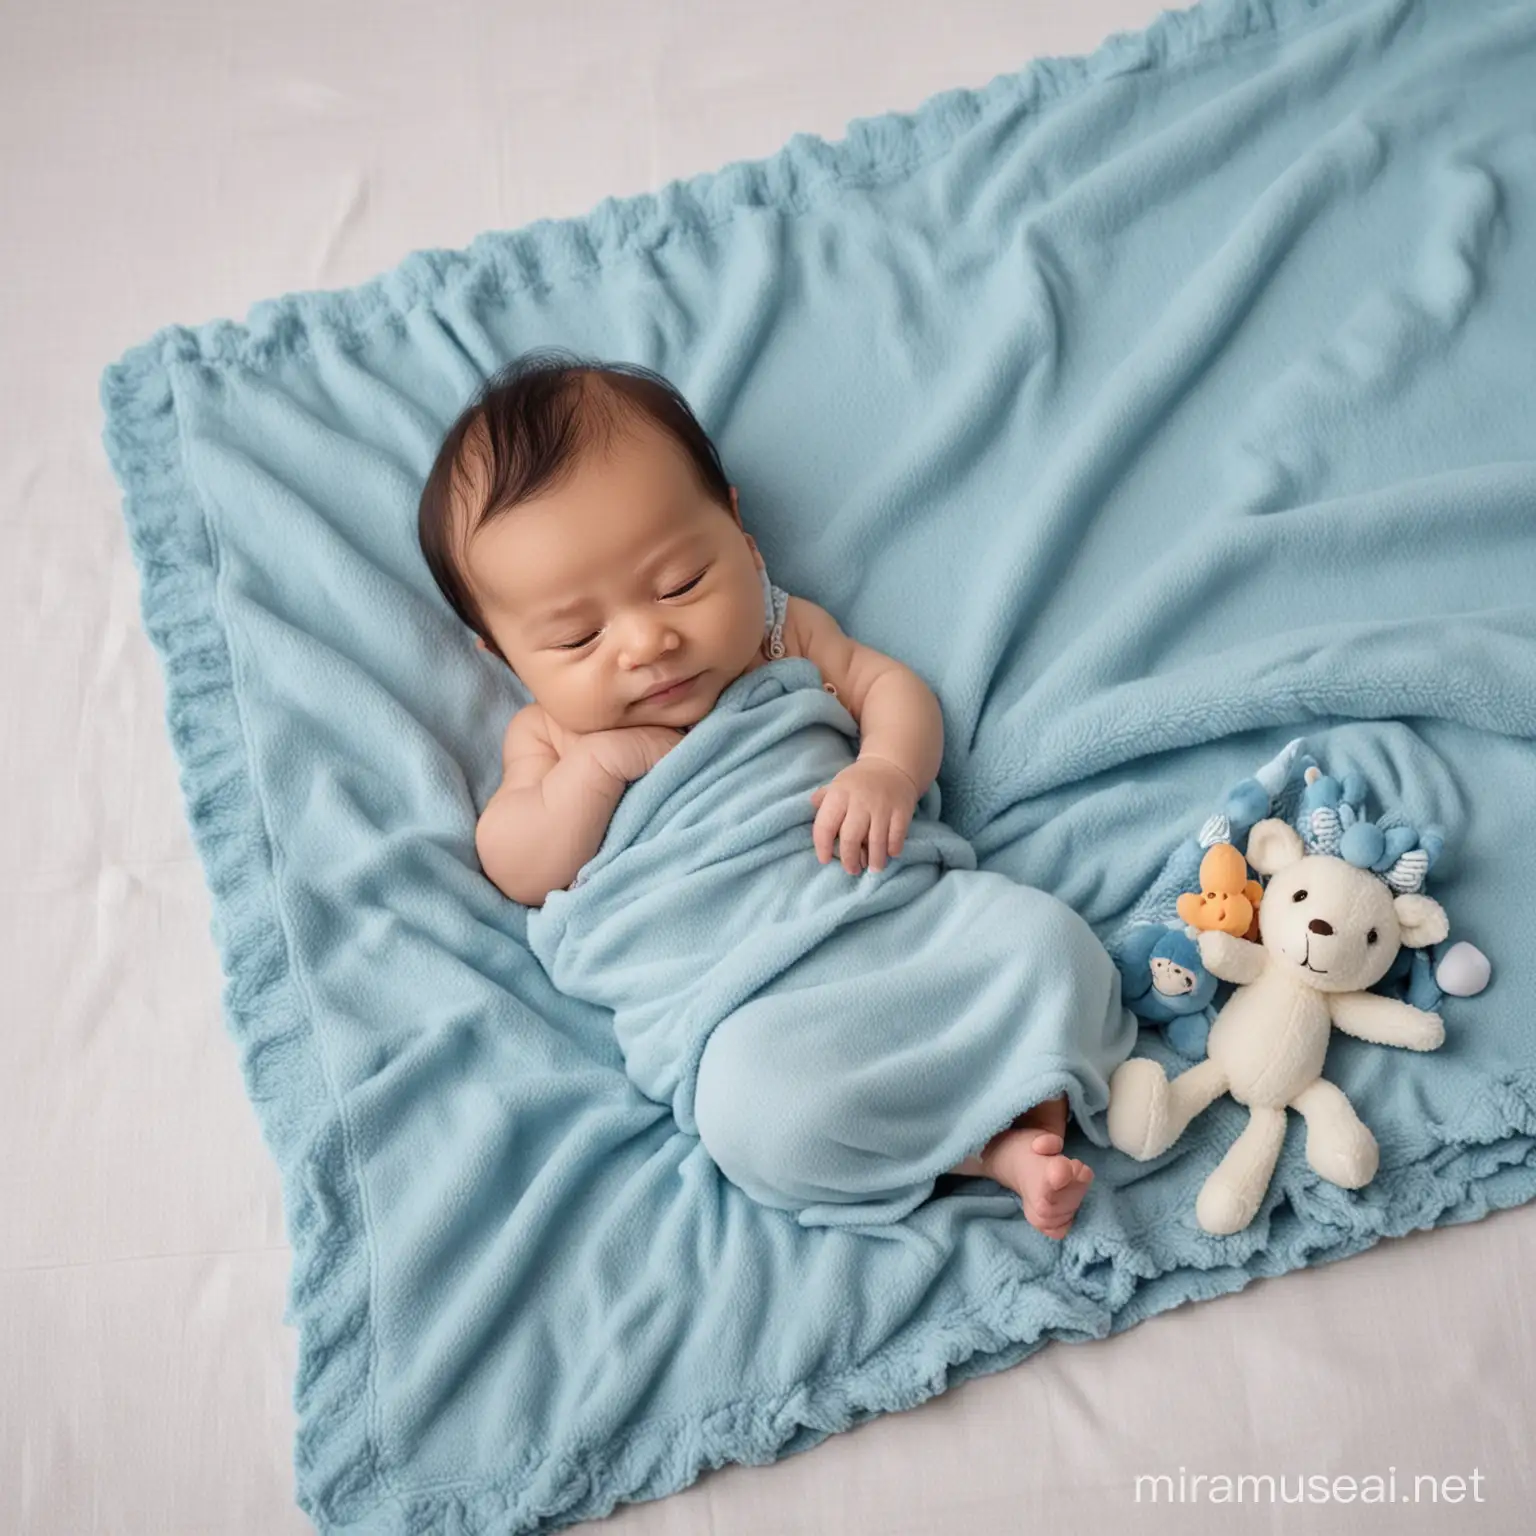 Soft Blue Baby Blanket with Cute Toys for Indian Newborns